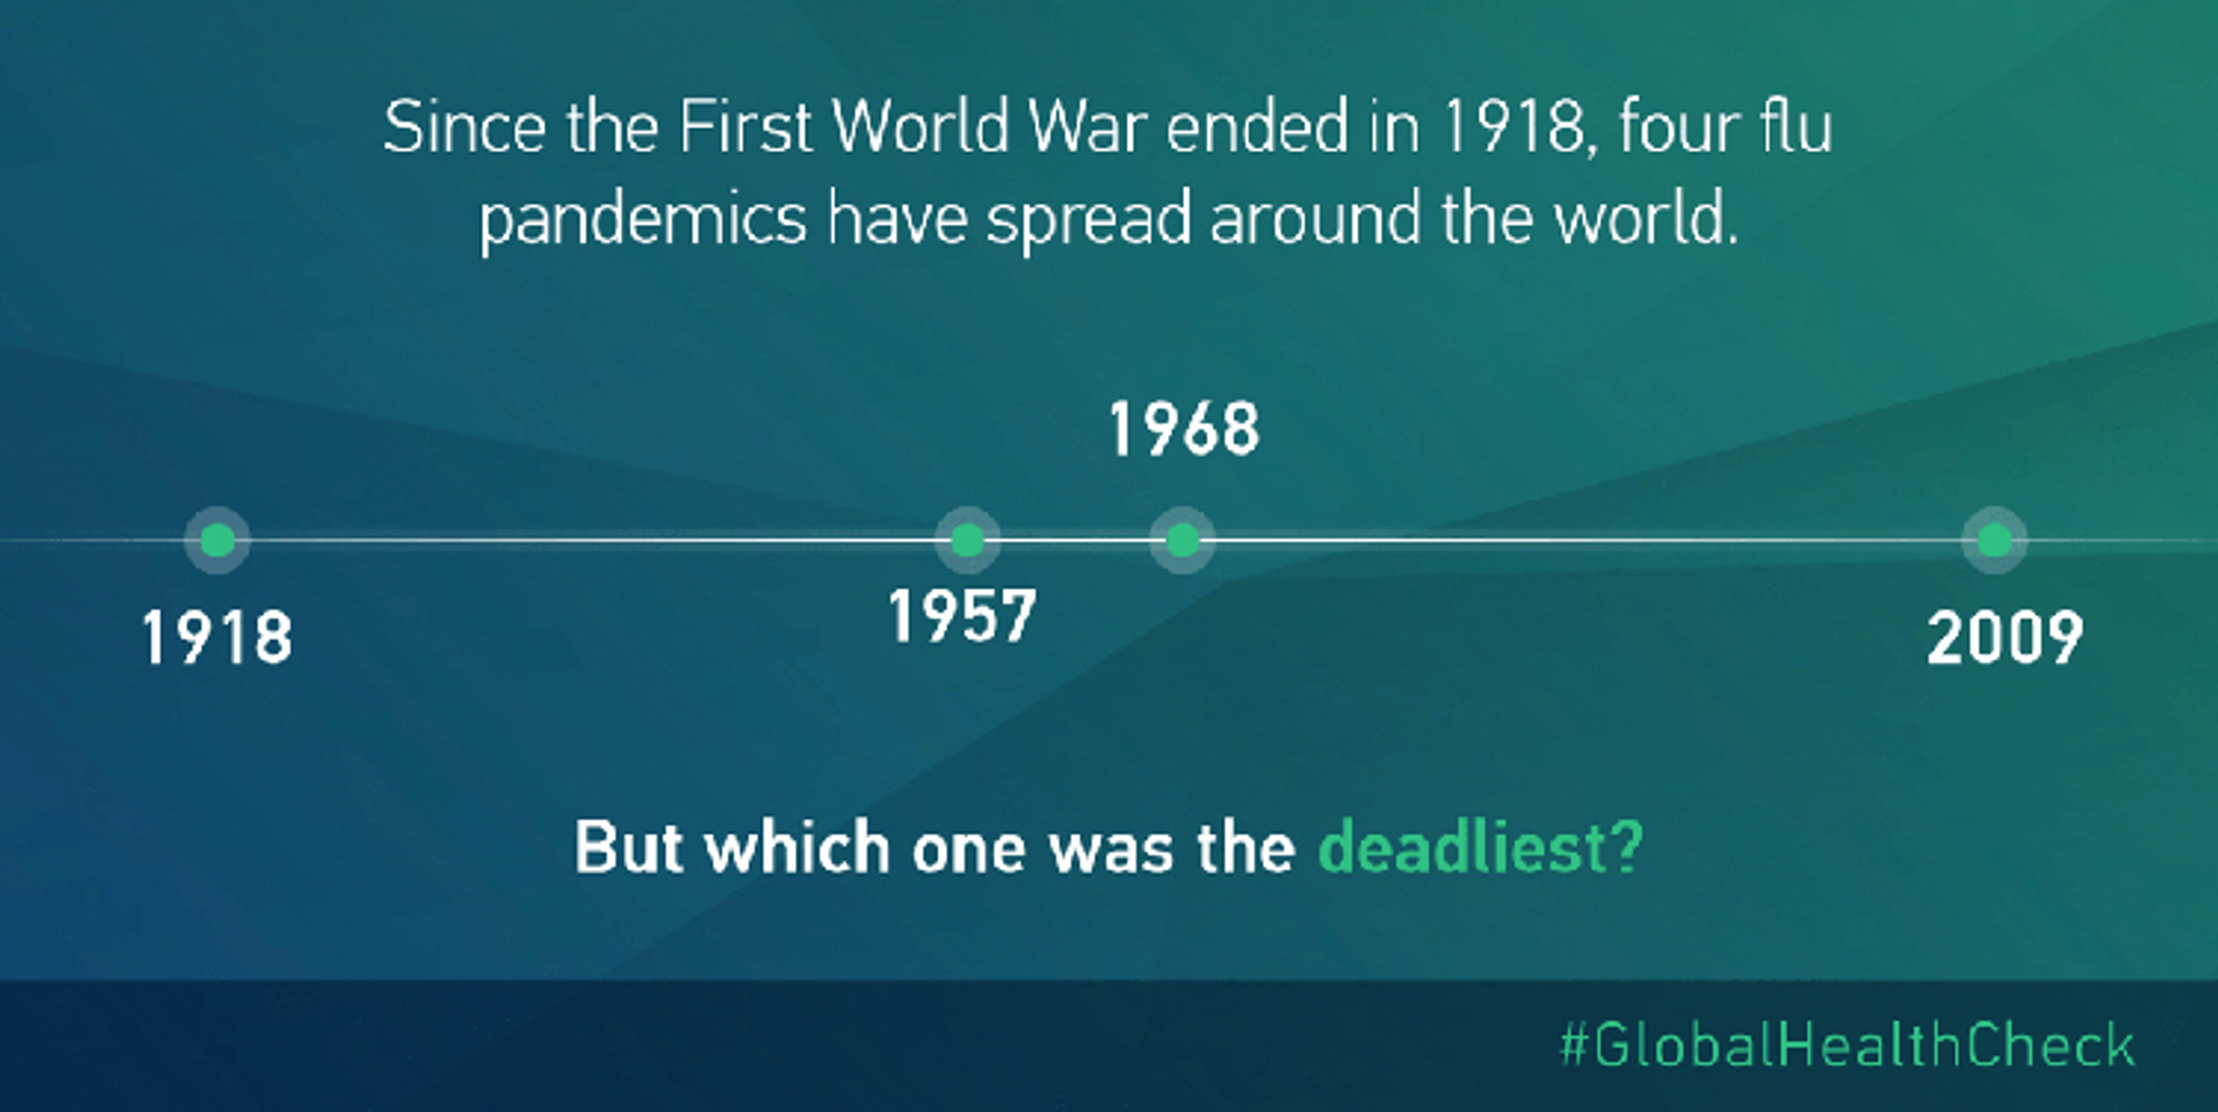 A timeline showing the dates of the four flu pandemics that have ocurred since the First World War ended. They occurred in 1918, 1957, 1968 and 2009.